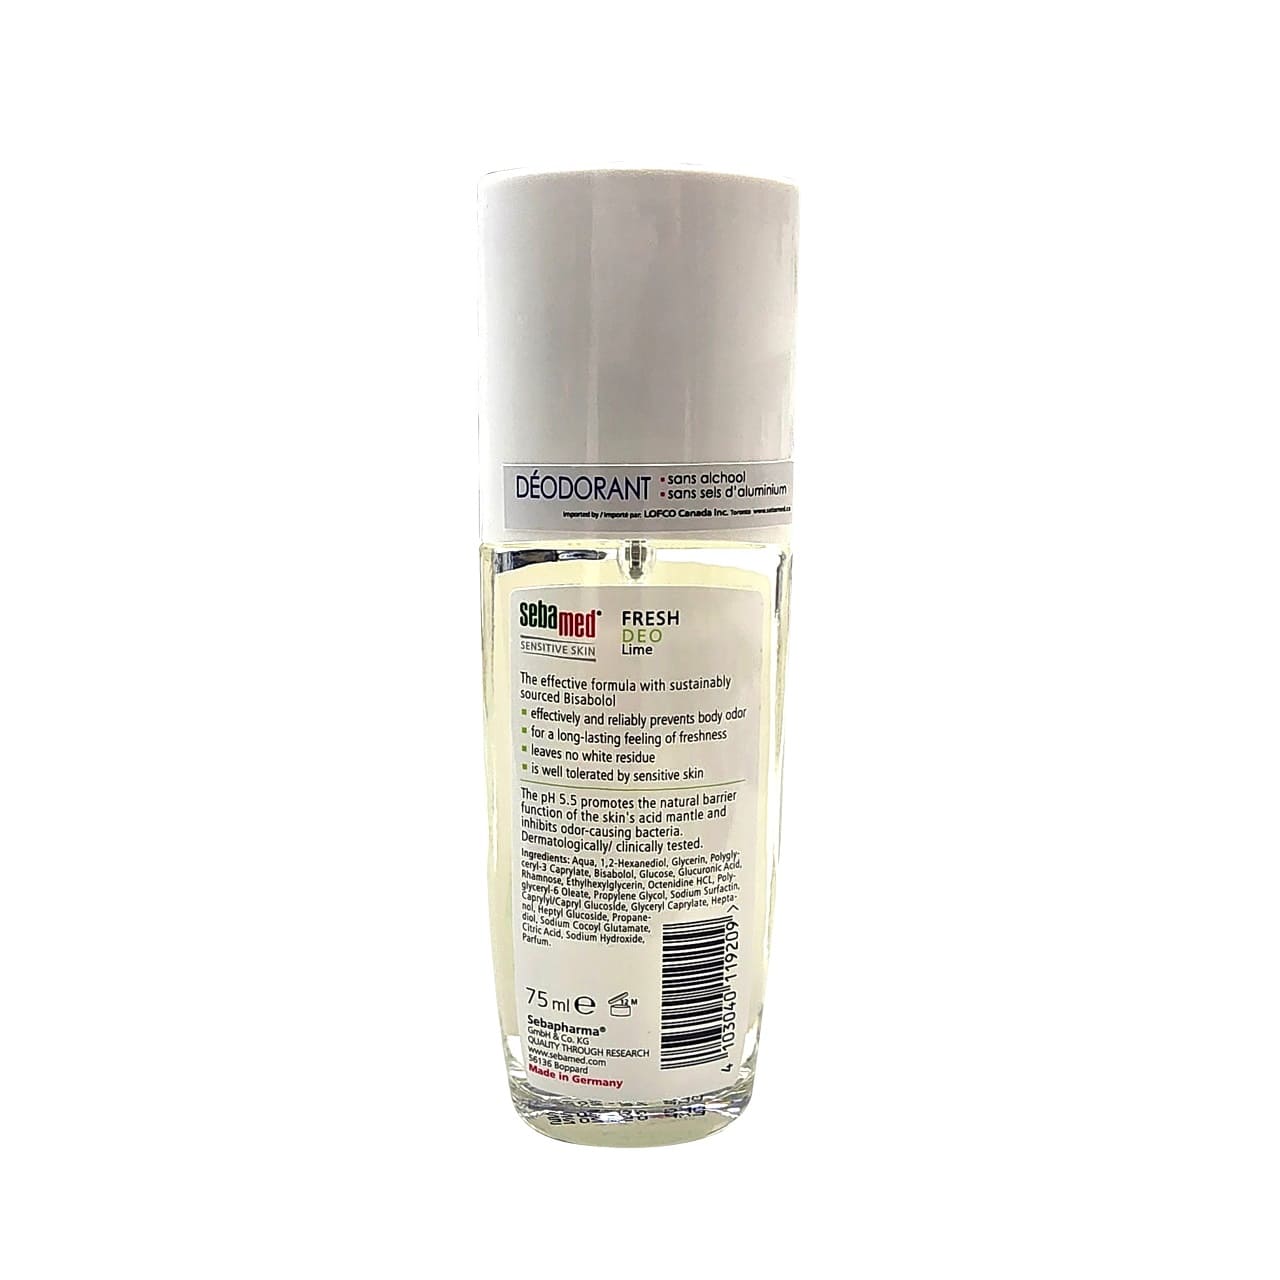 Description and ingredients for Sebamed 48-Hour Care Spray Deodorant Lime Scent